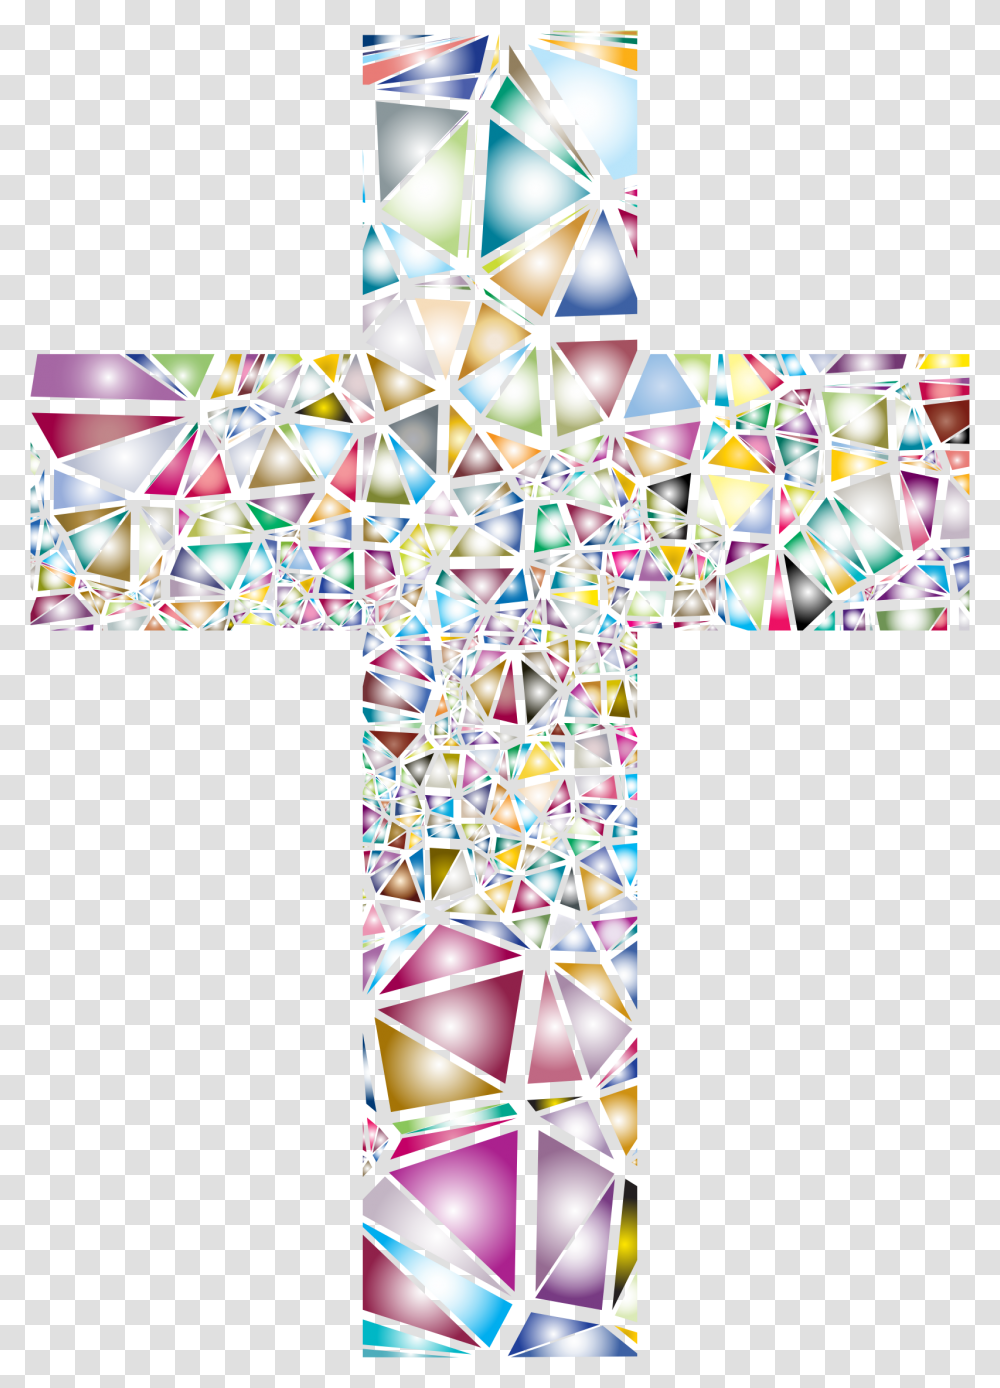 This Free Icons Design Of Low Poly Stained Glass Stained Glass No Background, Cross, Crucifix Transparent Png